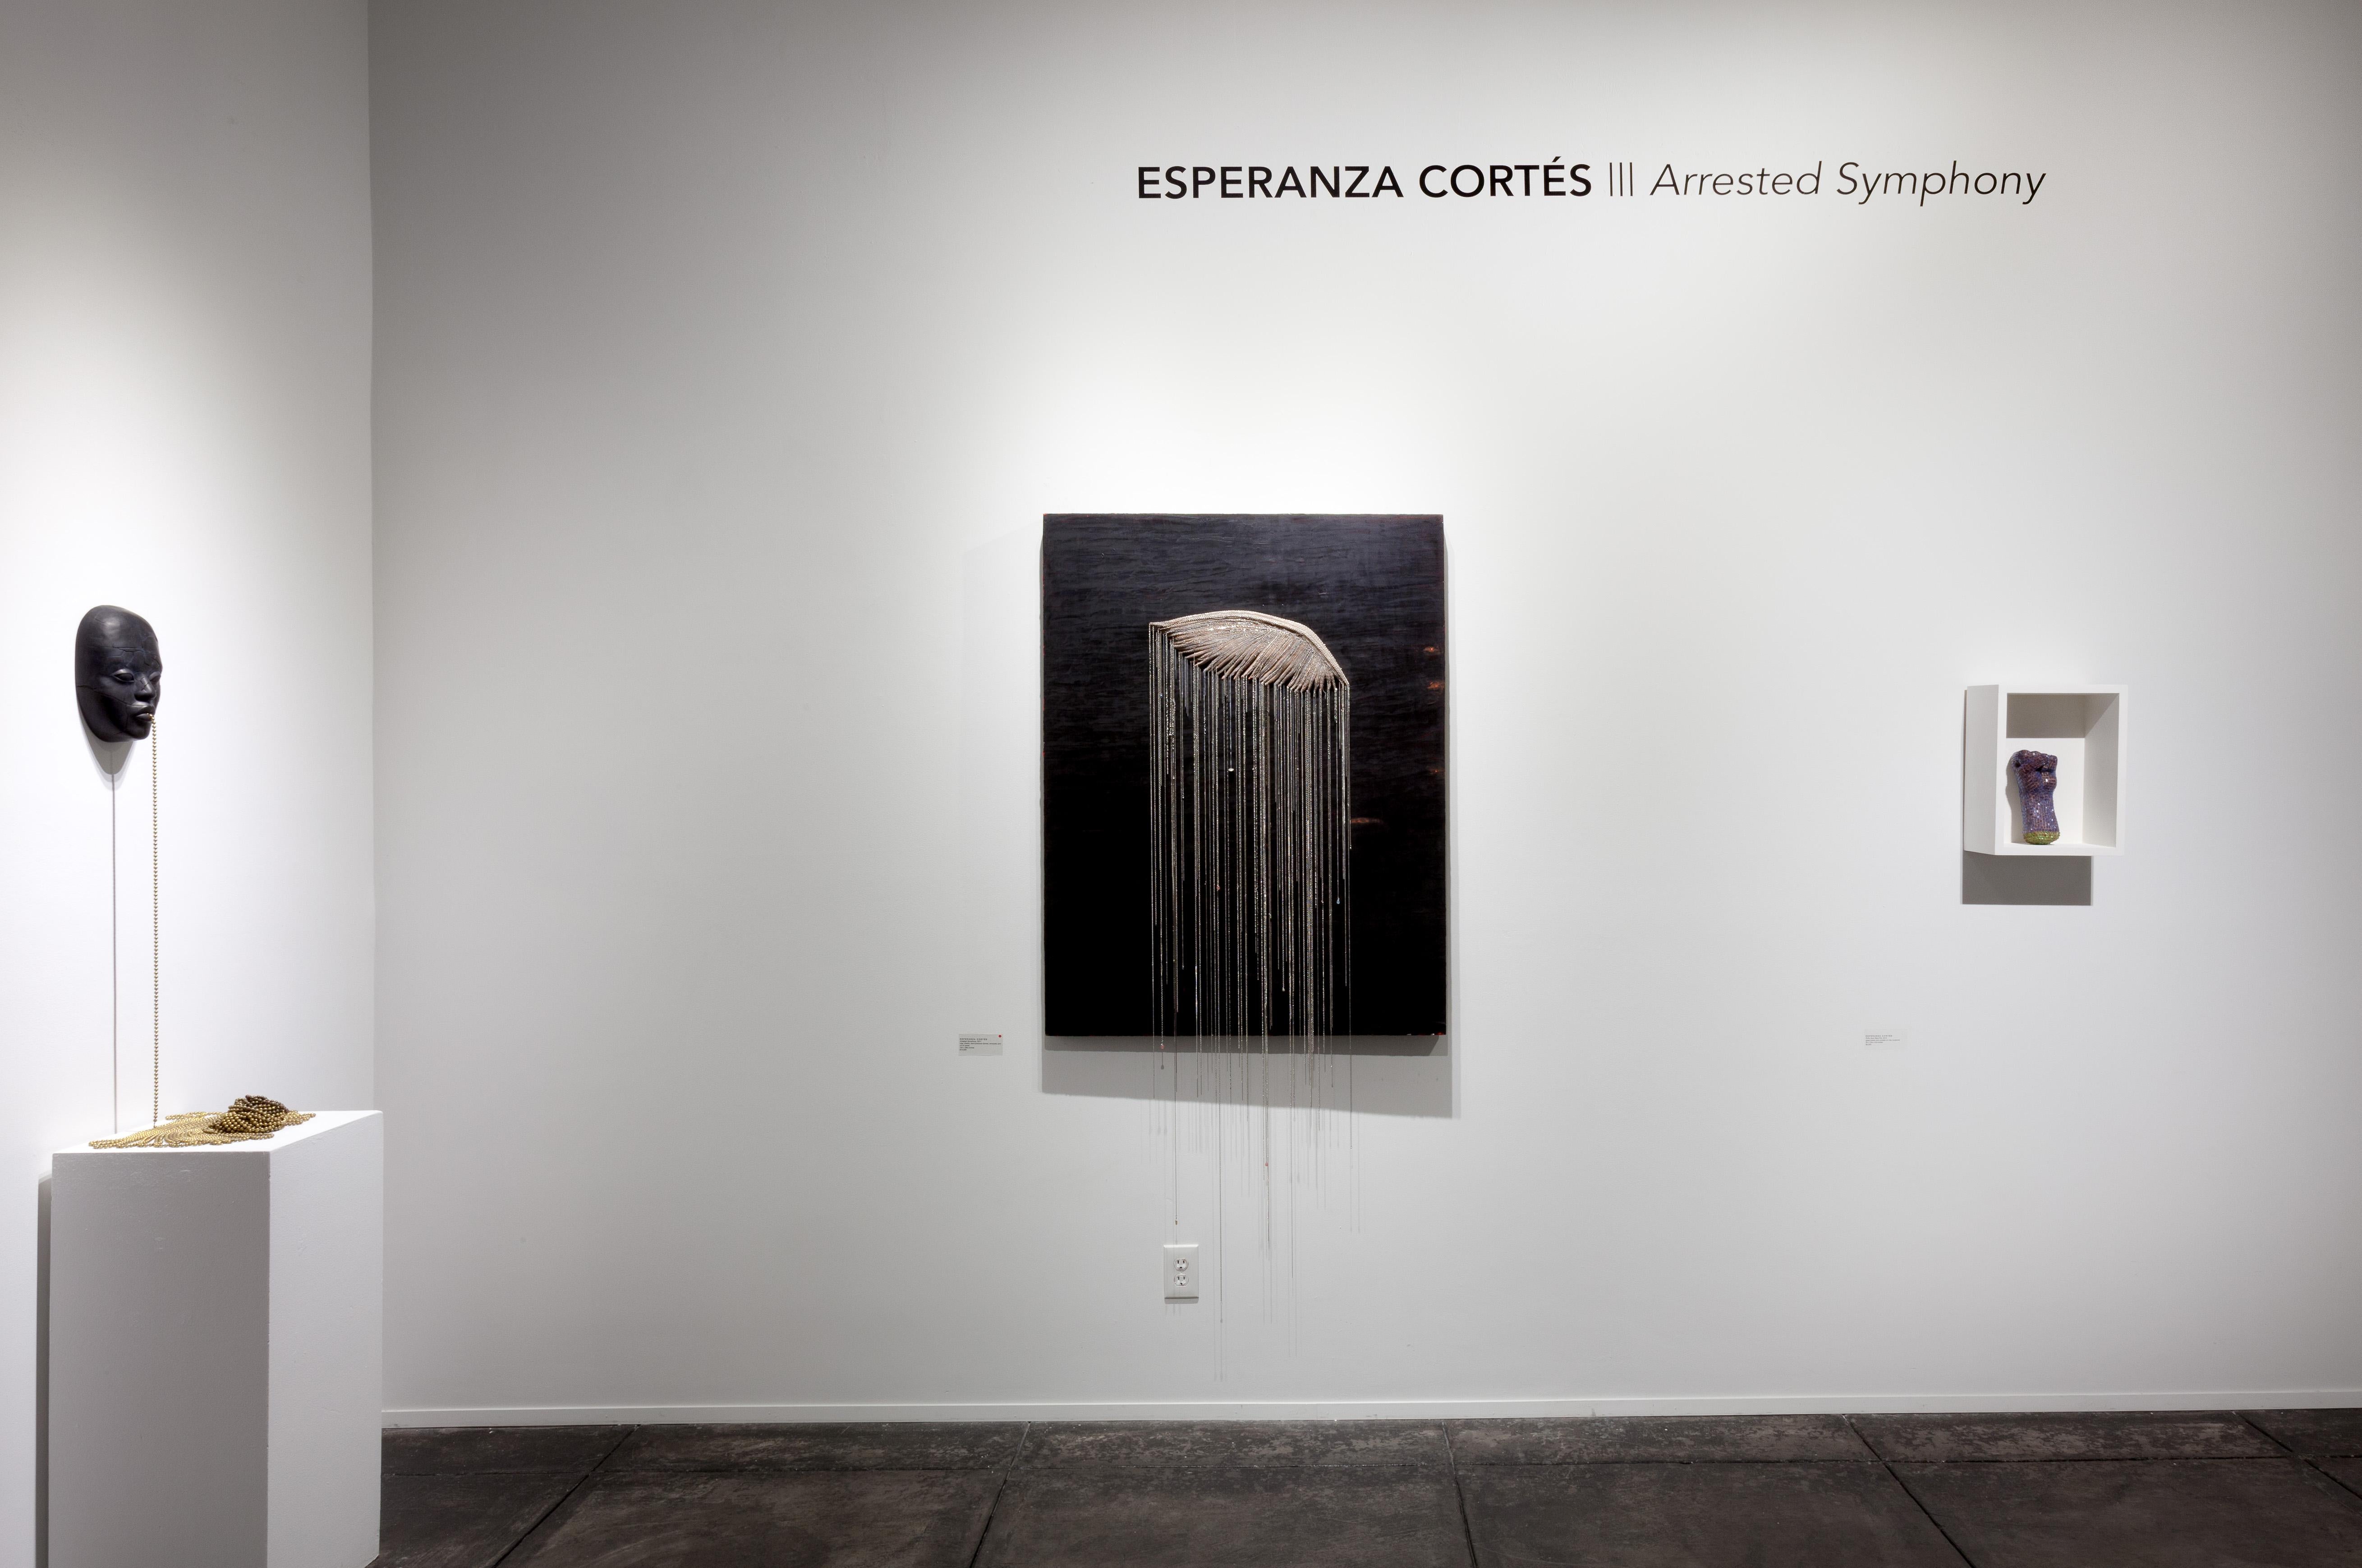 Materials: clay, brass beads

Esperanza Cortés is a Colombian born multidisciplinary artist based in New York City. Cortés has been exhibited nationally in galleries and museums including The Neuberger Museum of Art, Bronx Museum of Art, Queens